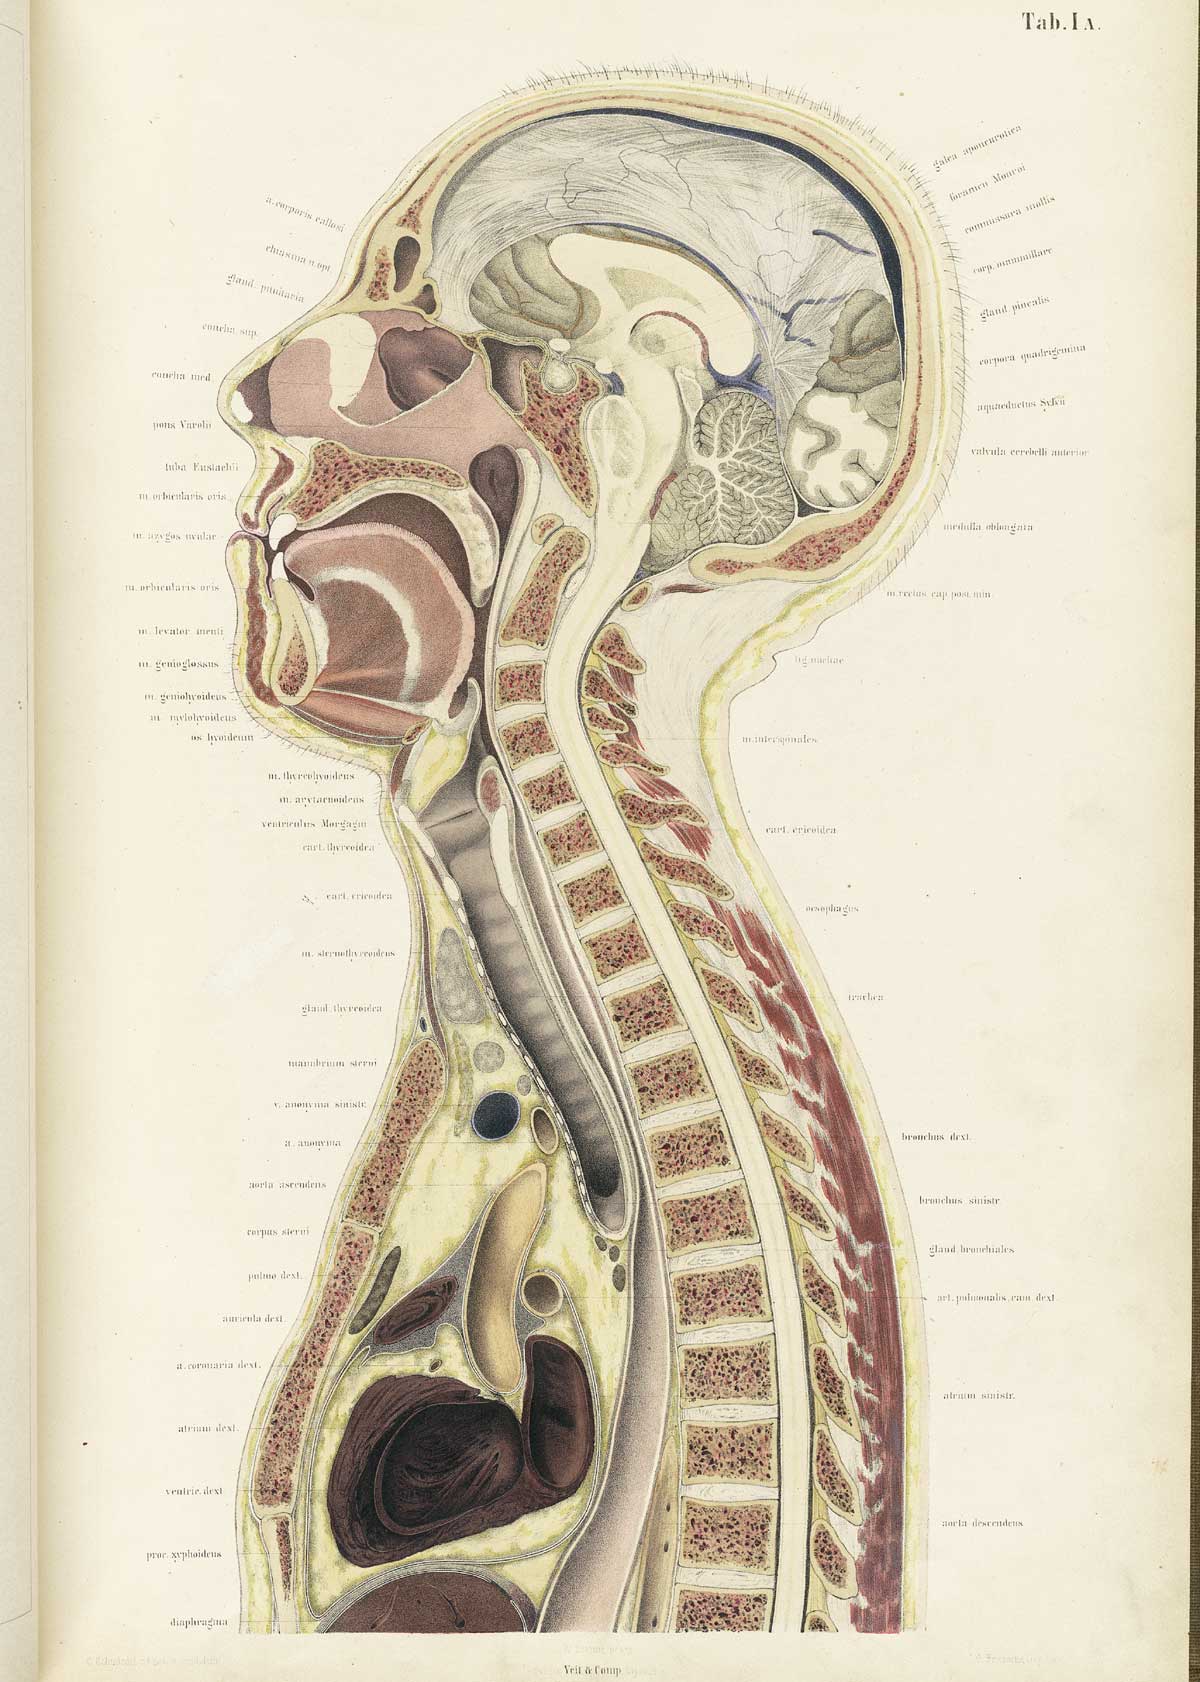 Chromolithograph of the cross-section of an adult male head and thorax of an individual facing to the left, exposing the brain, spinal column, moth, trachea, longs, heart and other organs and structures, from Wilhelm Braune’s Topographisch-anatomischer Atlas. Leipzig, 1867.